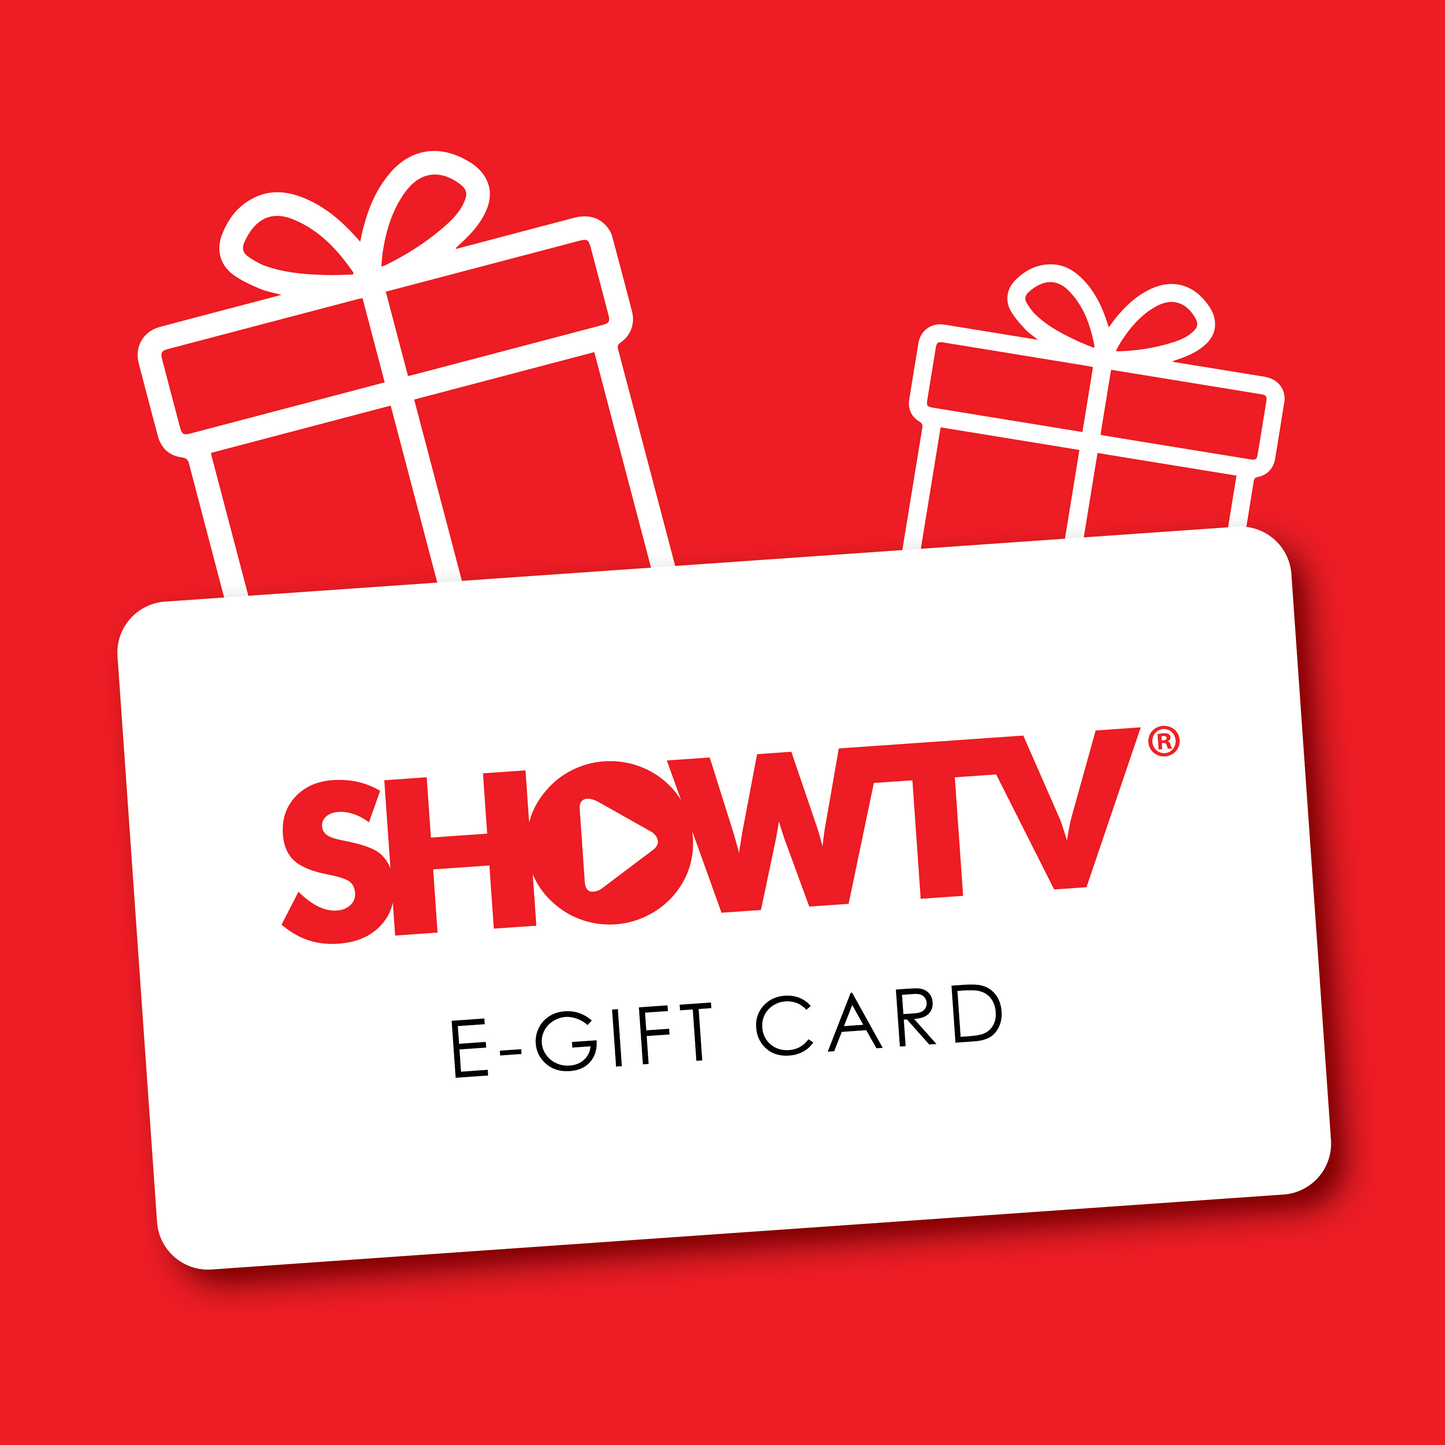 Show TV Electronic Gift Card